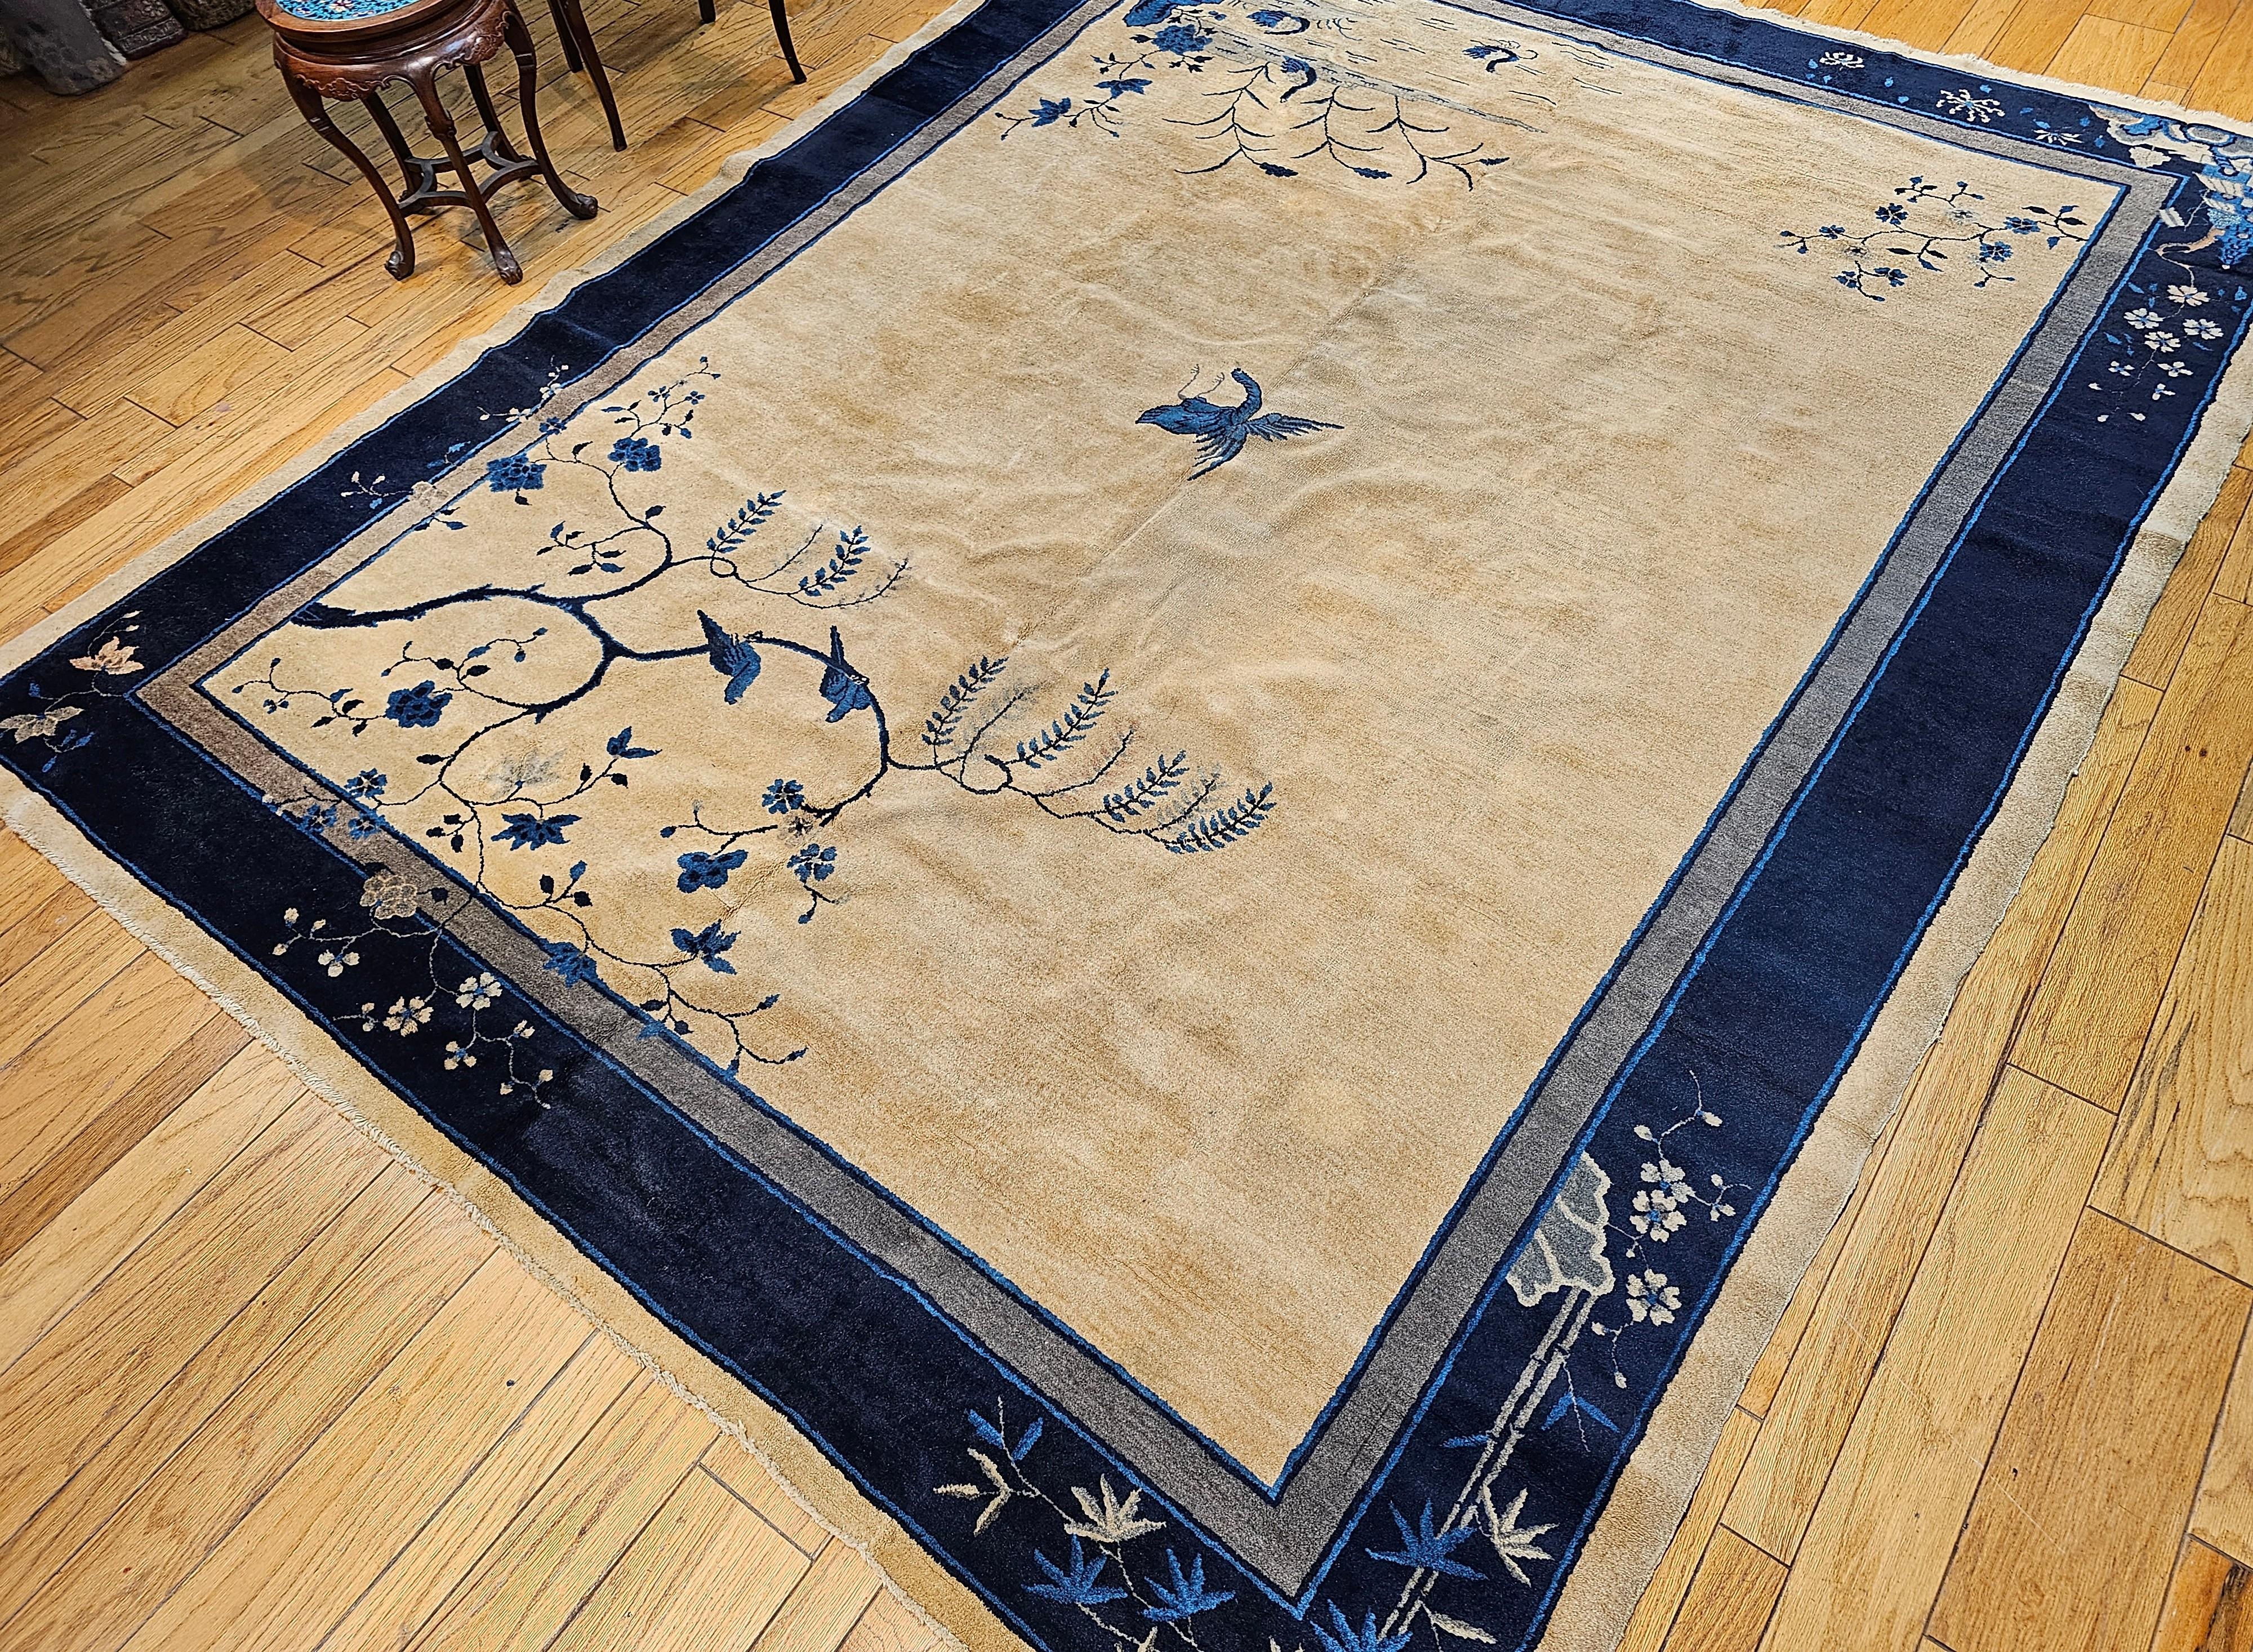 Vintage Art Deco Chinese Rug with Cranes, Pagoda, Mountains in Wheat, Blue, Navy For Sale 11